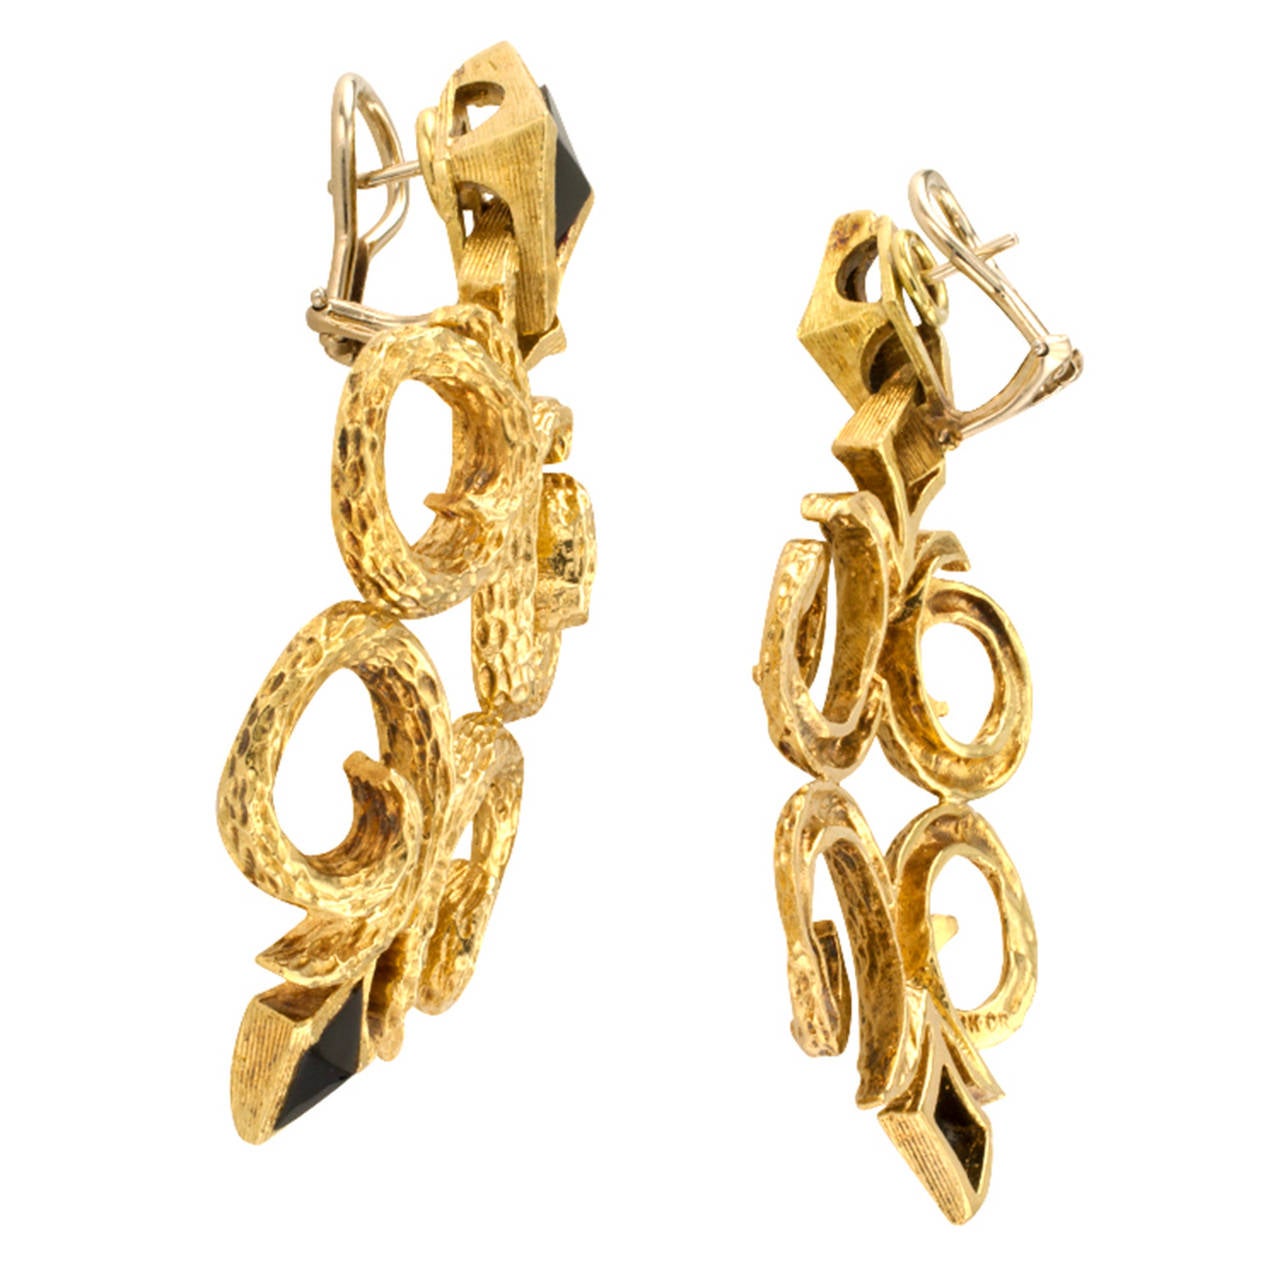 Diamond-shaped onyx motifs within conforming gold frames comprise the surmounts and bottoms of this articulated and larger scale pair of earrings.  Between them is an open quatrefoil gold design embellished throughout with rich, evocative and exotic